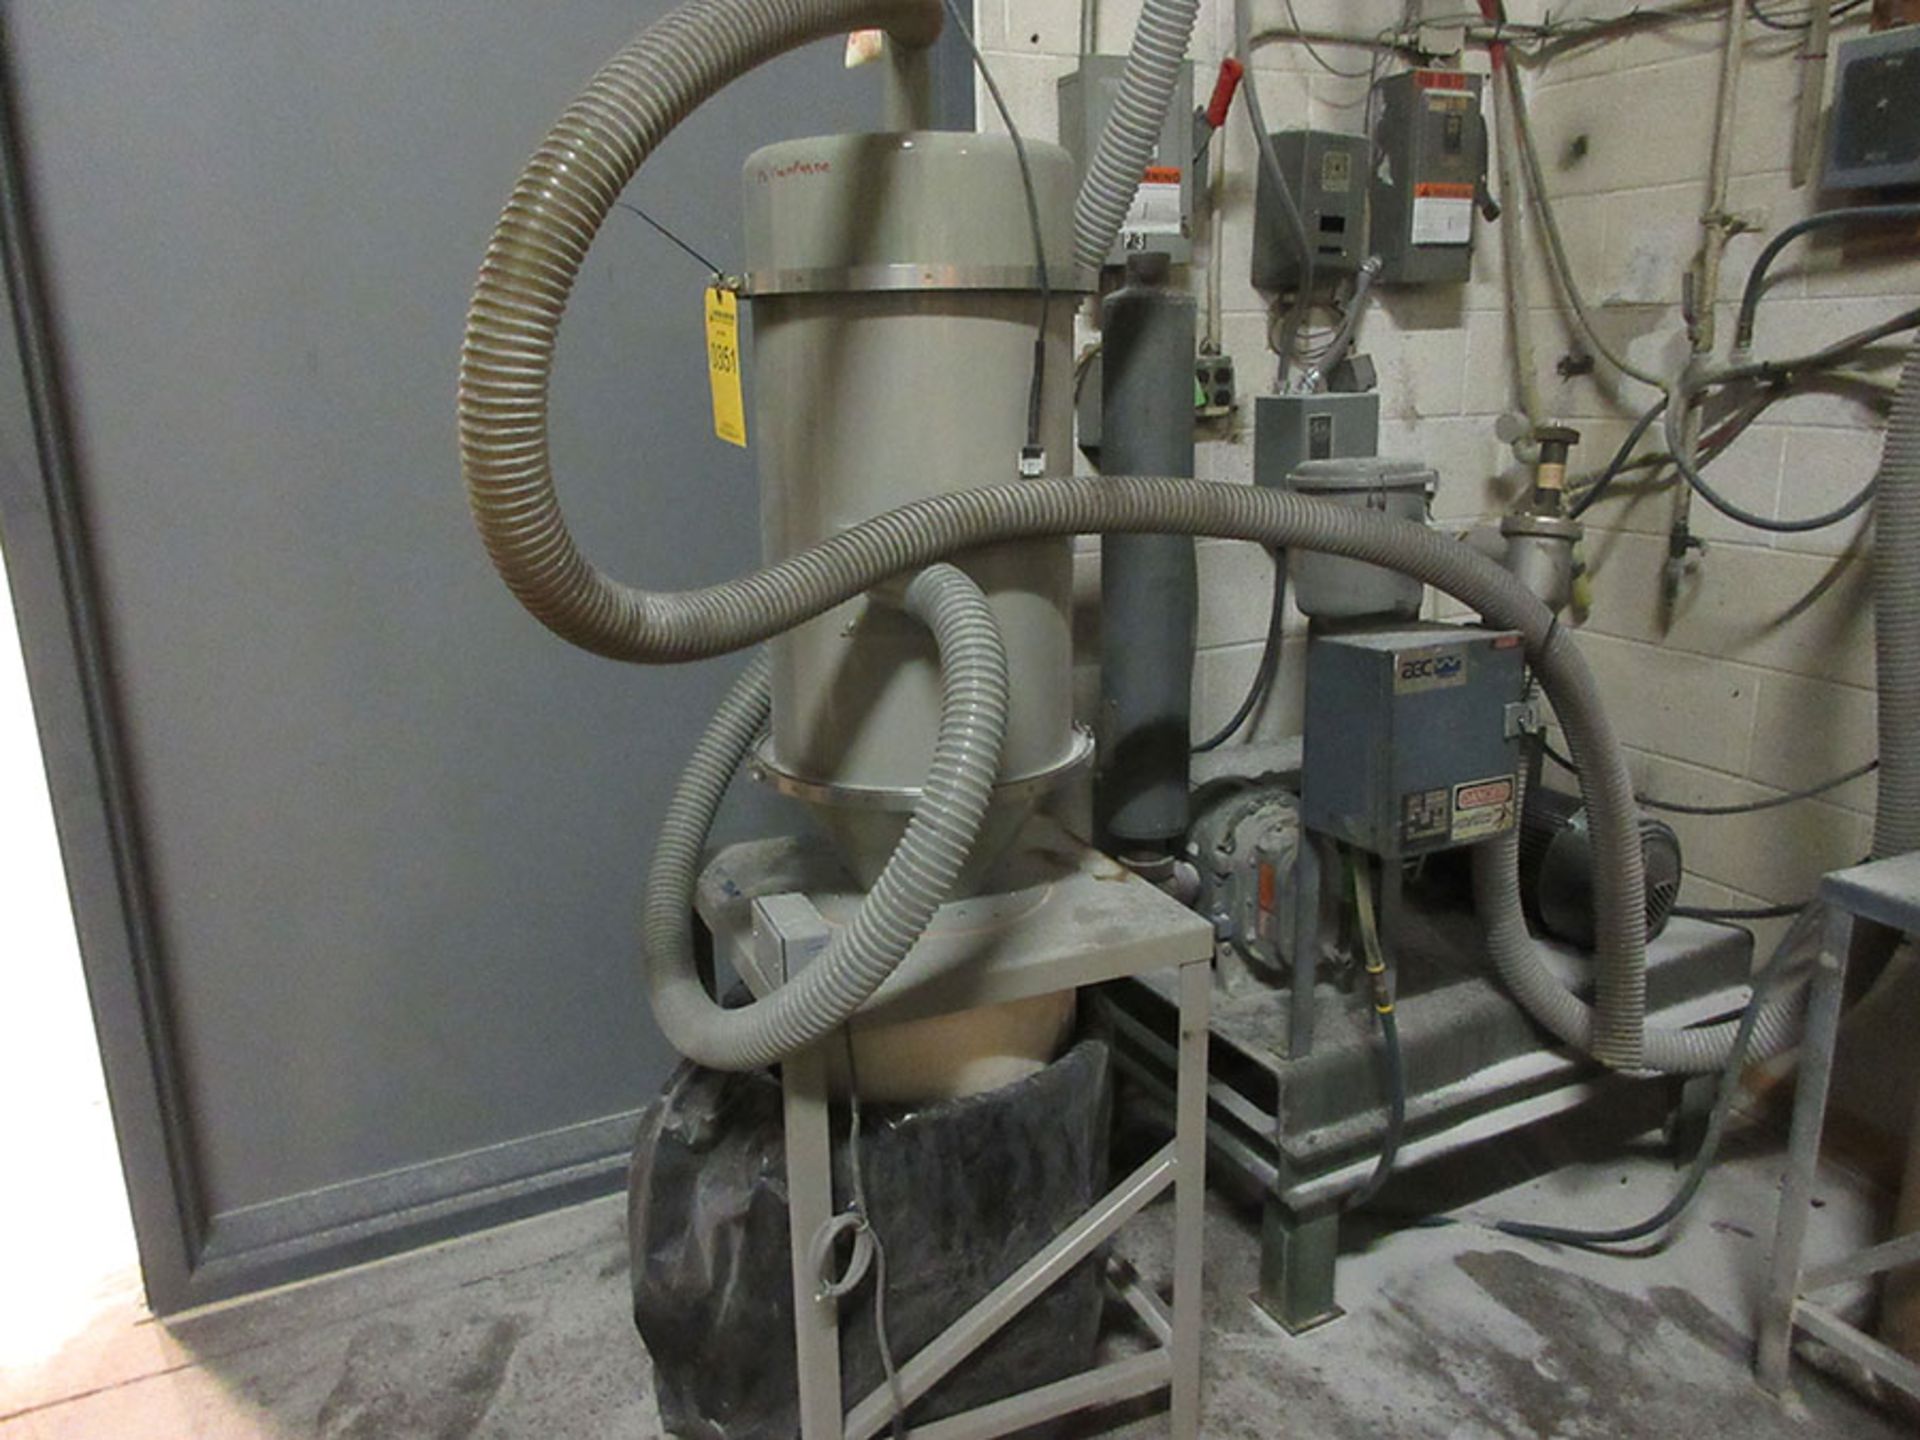 AEC WHITLOCK VACUUM PUMP WITH WHITLOCK DEBRIS CANISTER (FLEX HOSE INCLUDED)